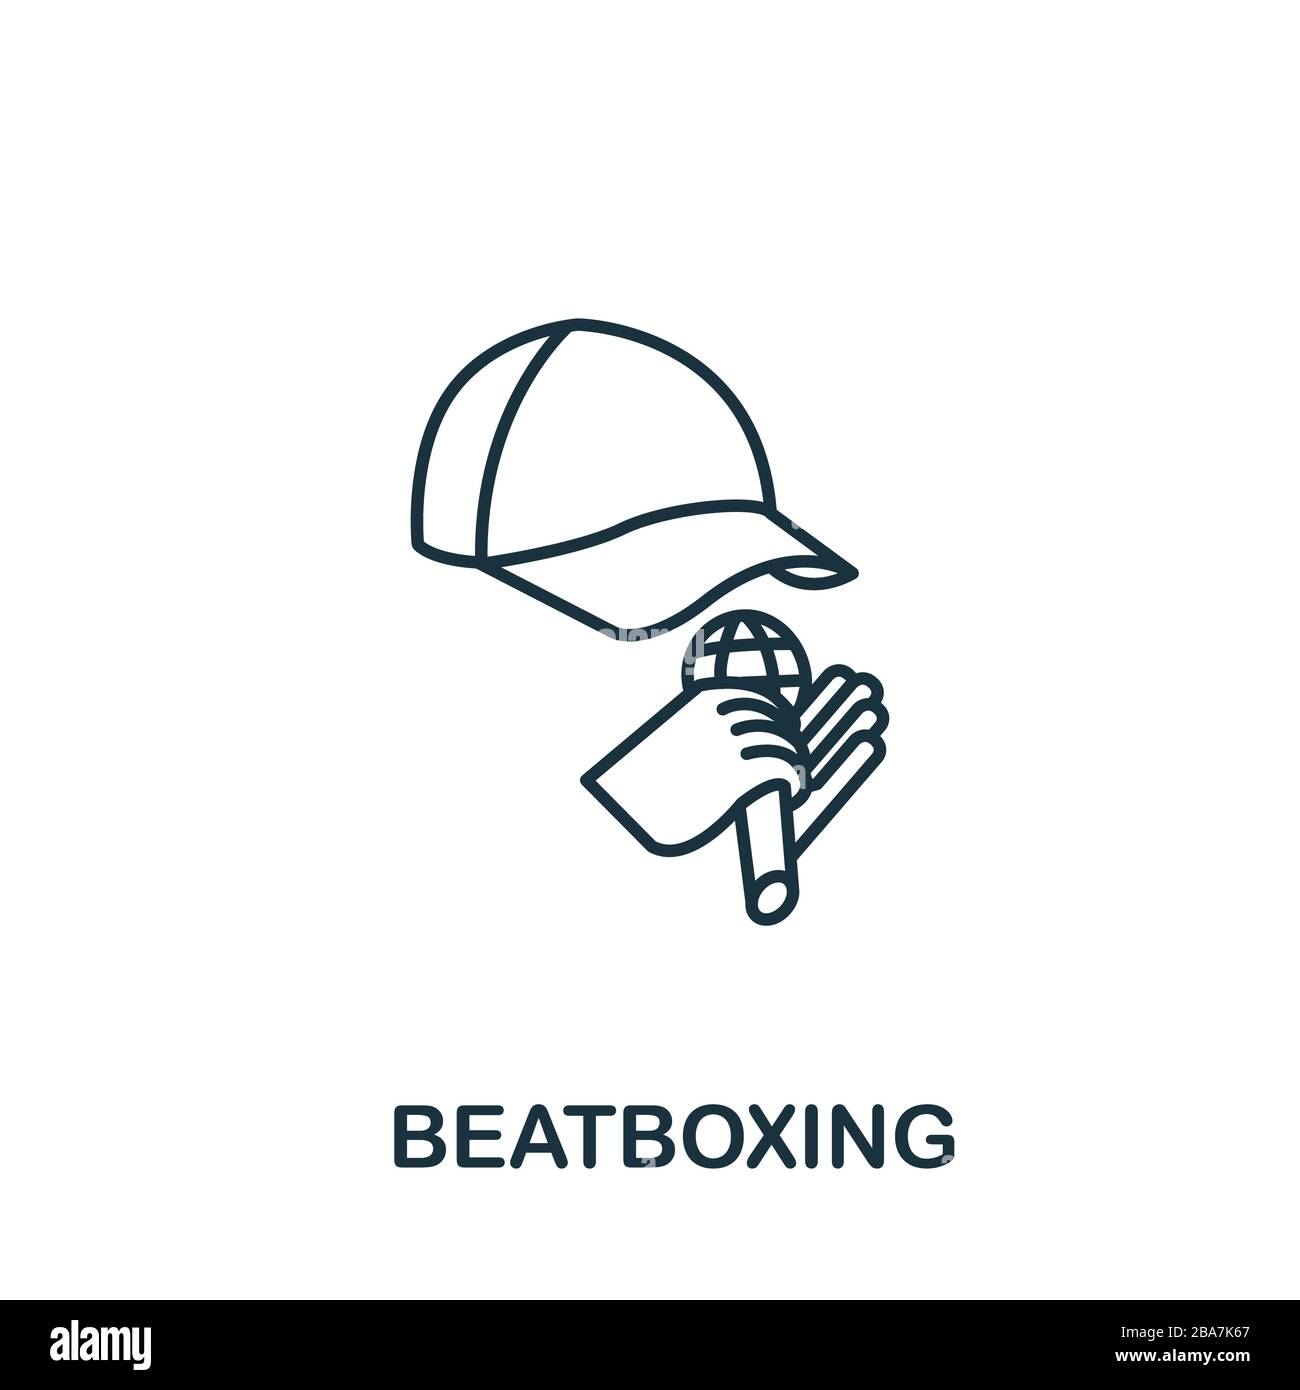 Beatboxing icon from hobbies collection. Simple line element Beatboxing  symbol for templates, web design and infographics Stock Photo - Alamy